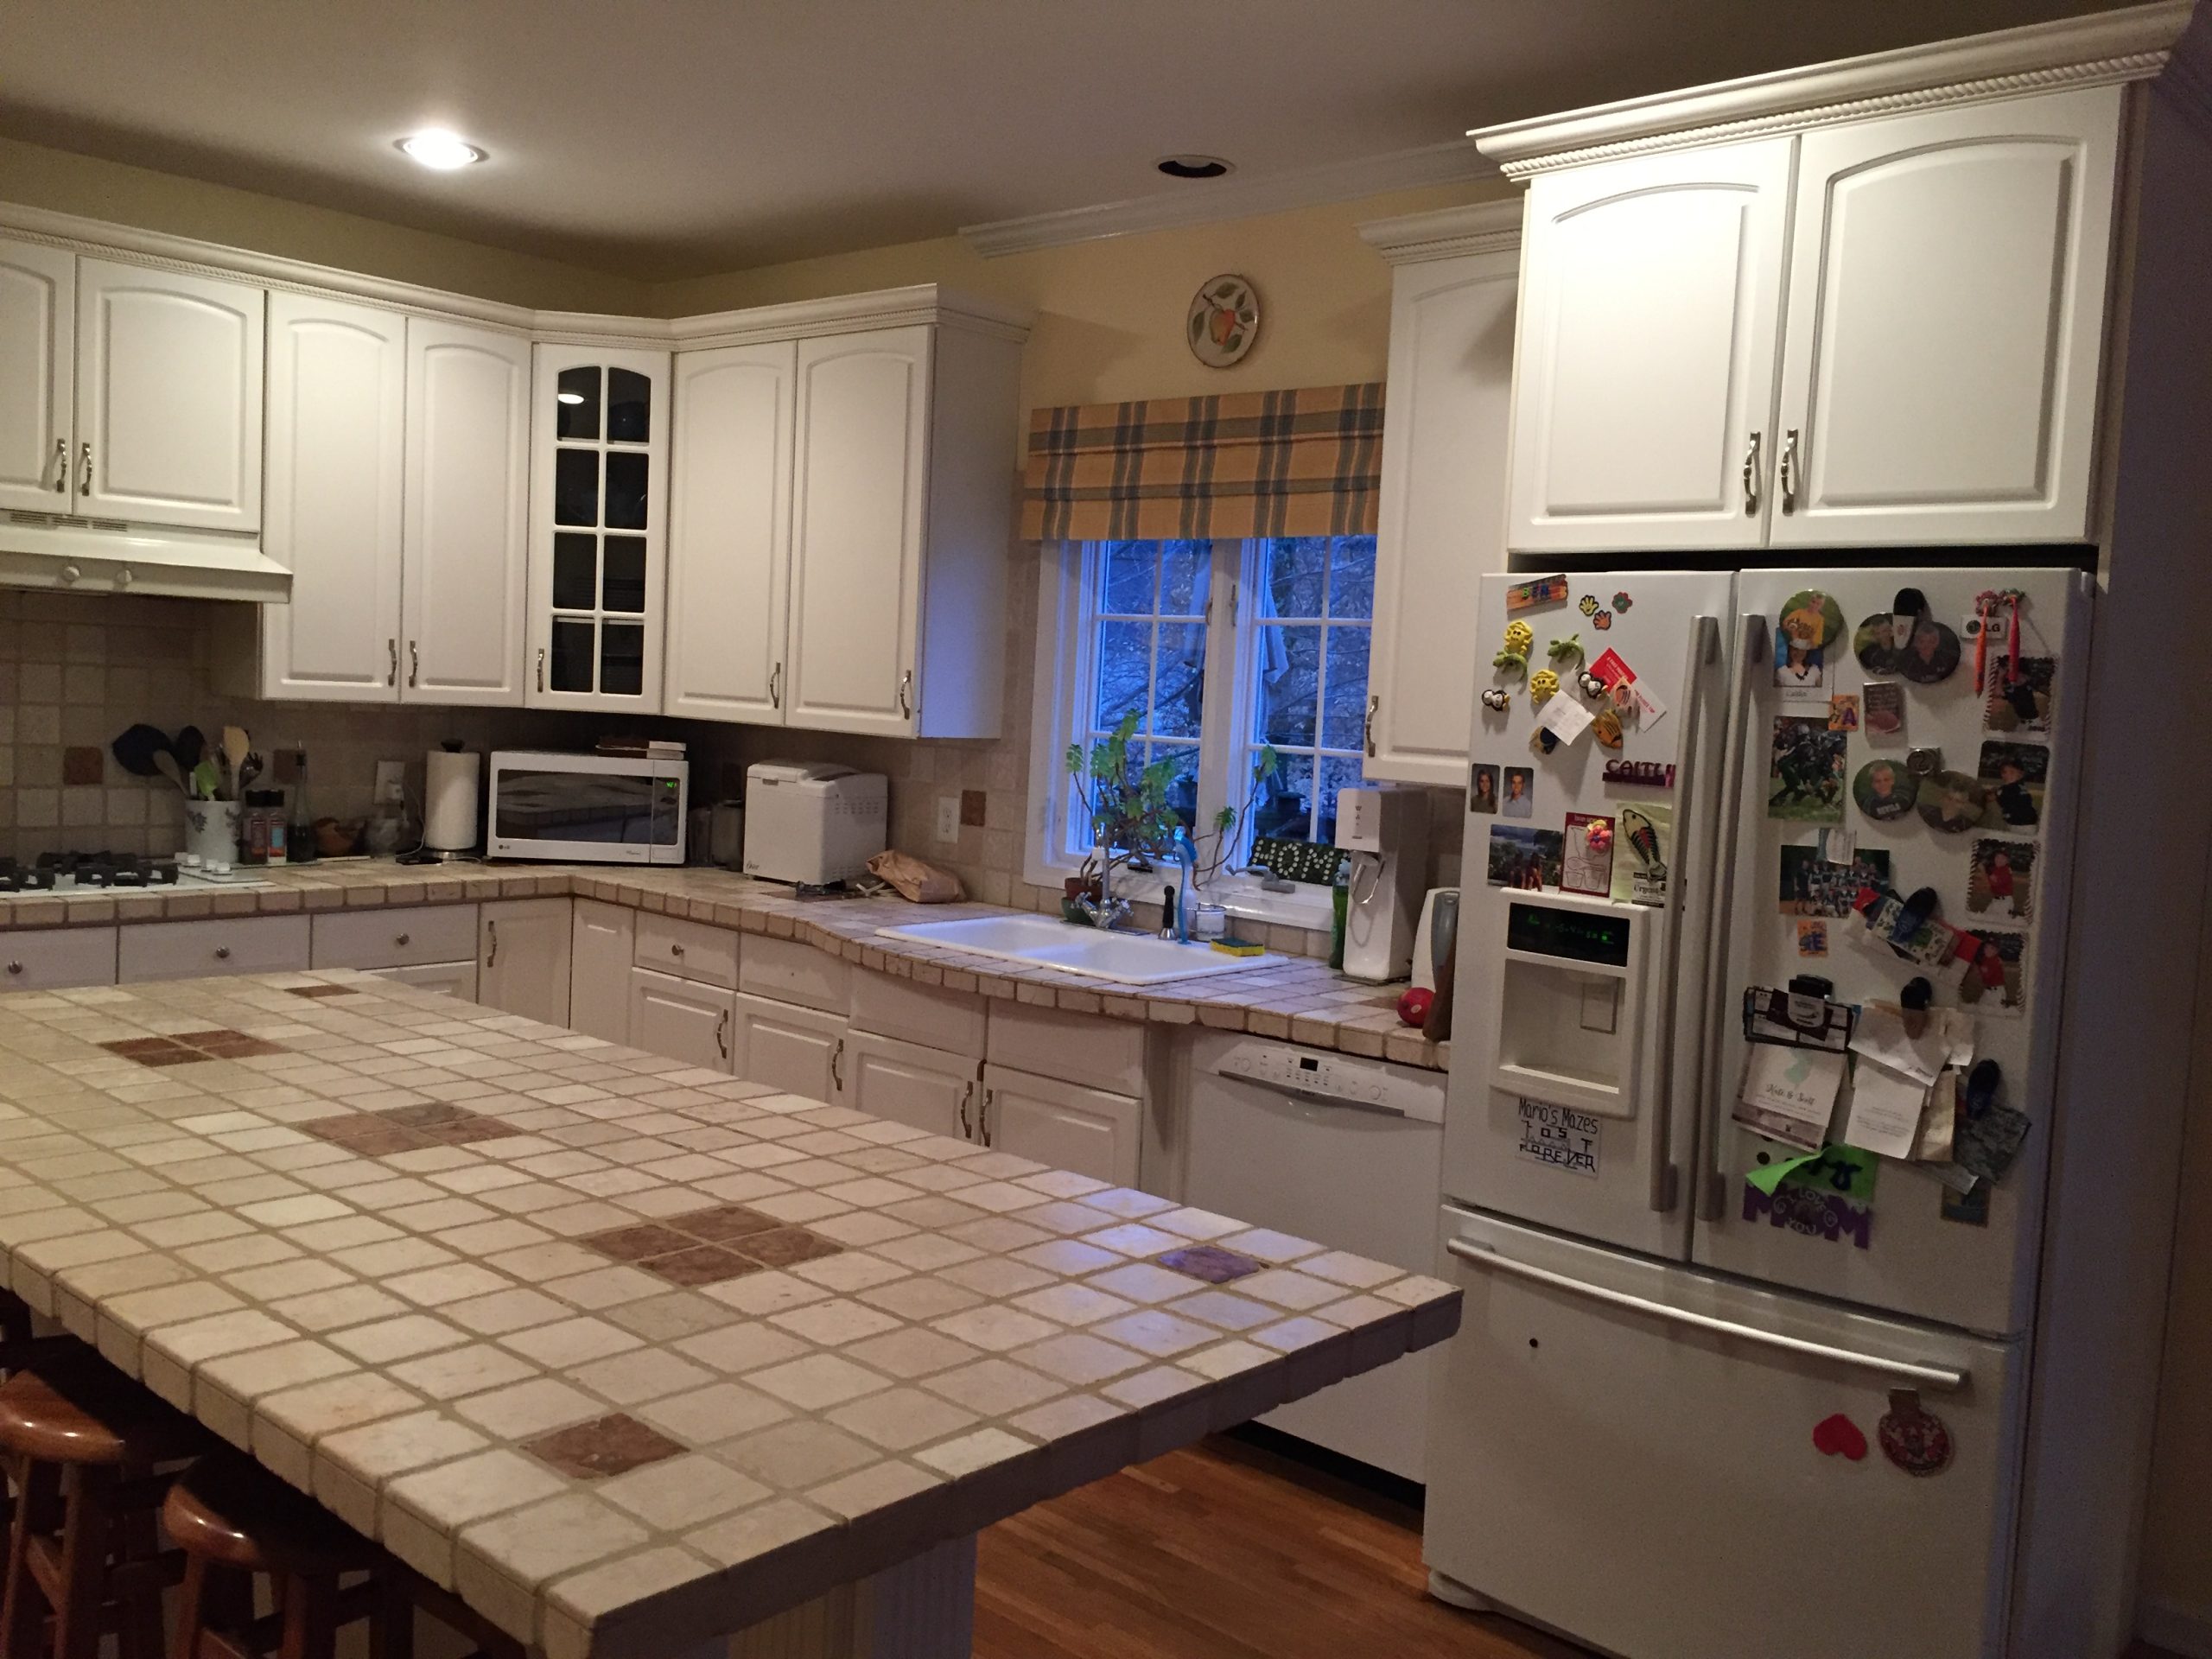 Kitchen before and after photos 3